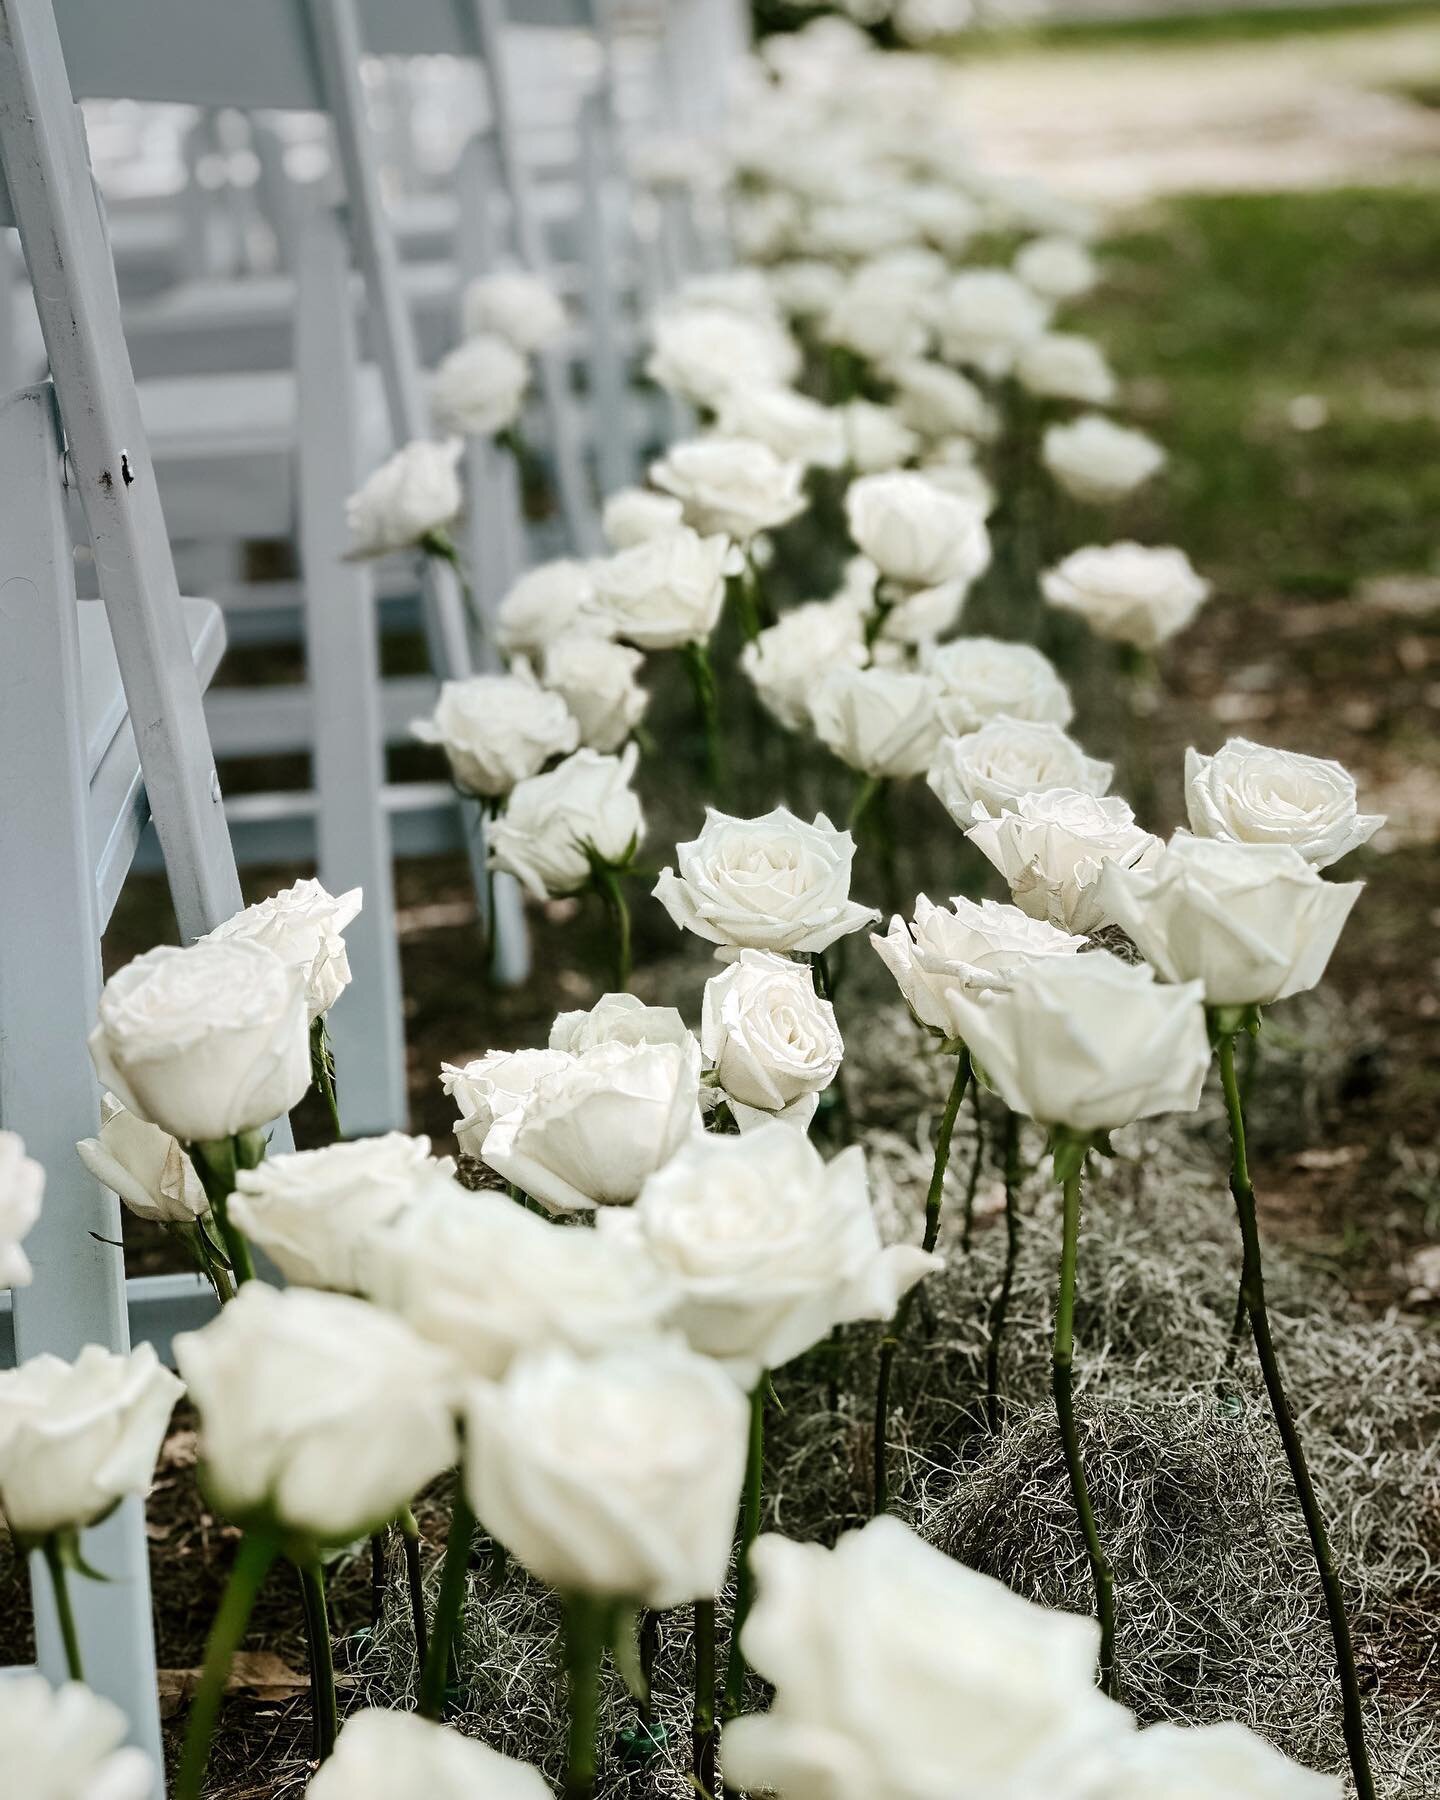 So about last weekend&hellip; this is&hellip;. 400 roses water picked into the ground 🪛 
⠀⠀⠀⠀⠀⠀⠀⠀⠀
If you&rsquo;re new around here, hi 👋🏽 did you know we have a team of wedding planners &amp; florists!? Amanda &amp; Logan&rsquo;s wedding at the @m